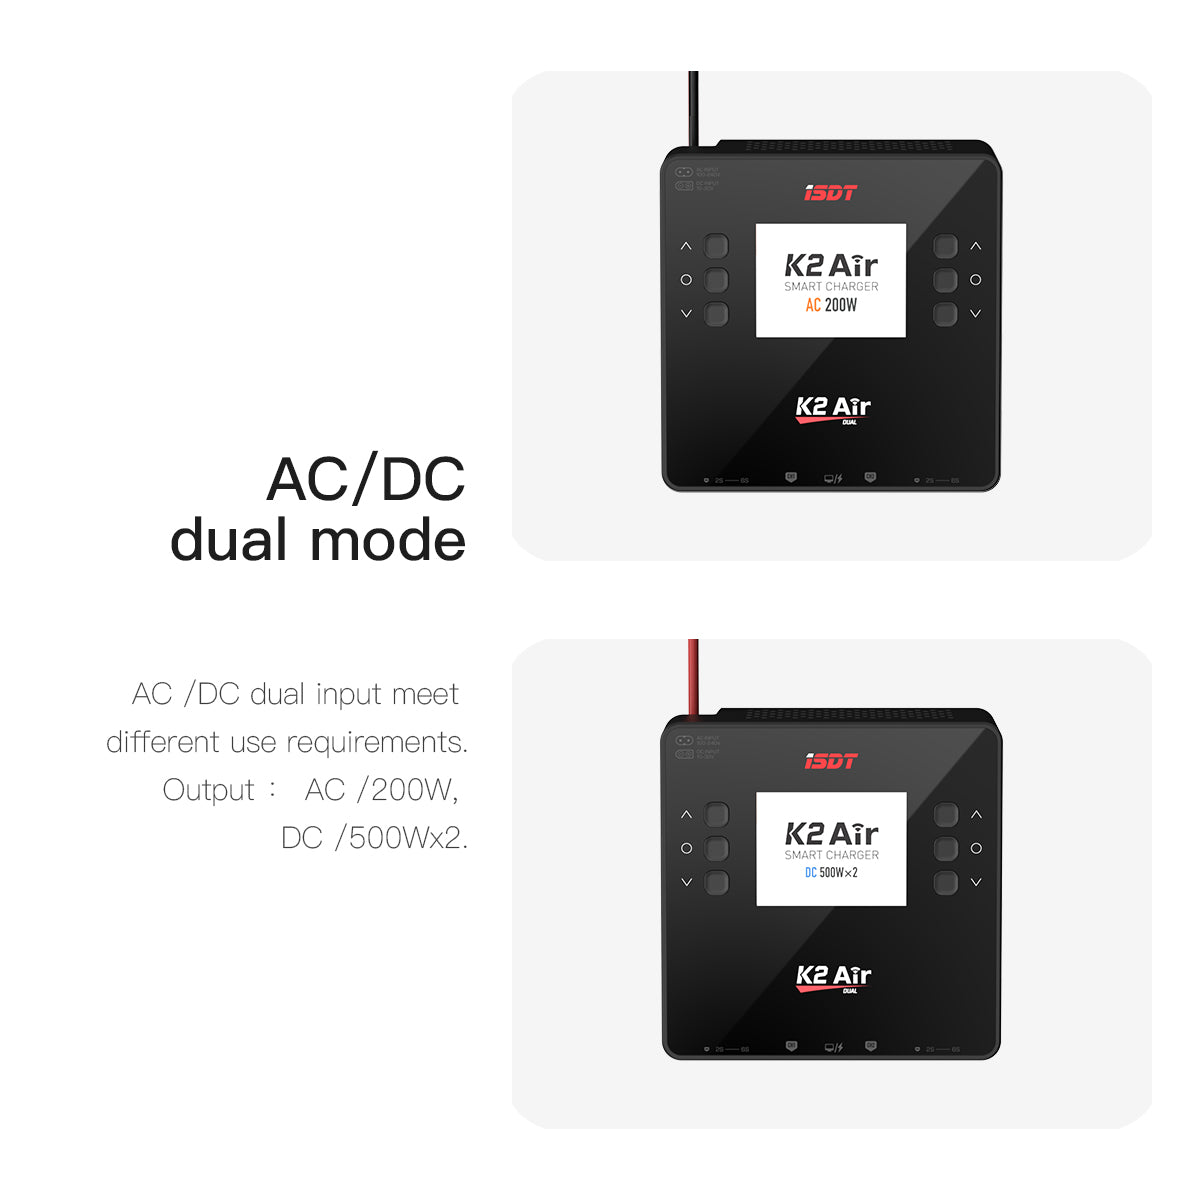 K2 Air Bluetooth Remote Control Lipo Charger,AC/DC 200W/500Wx2 20A Smart  Balance Discharger/Charger